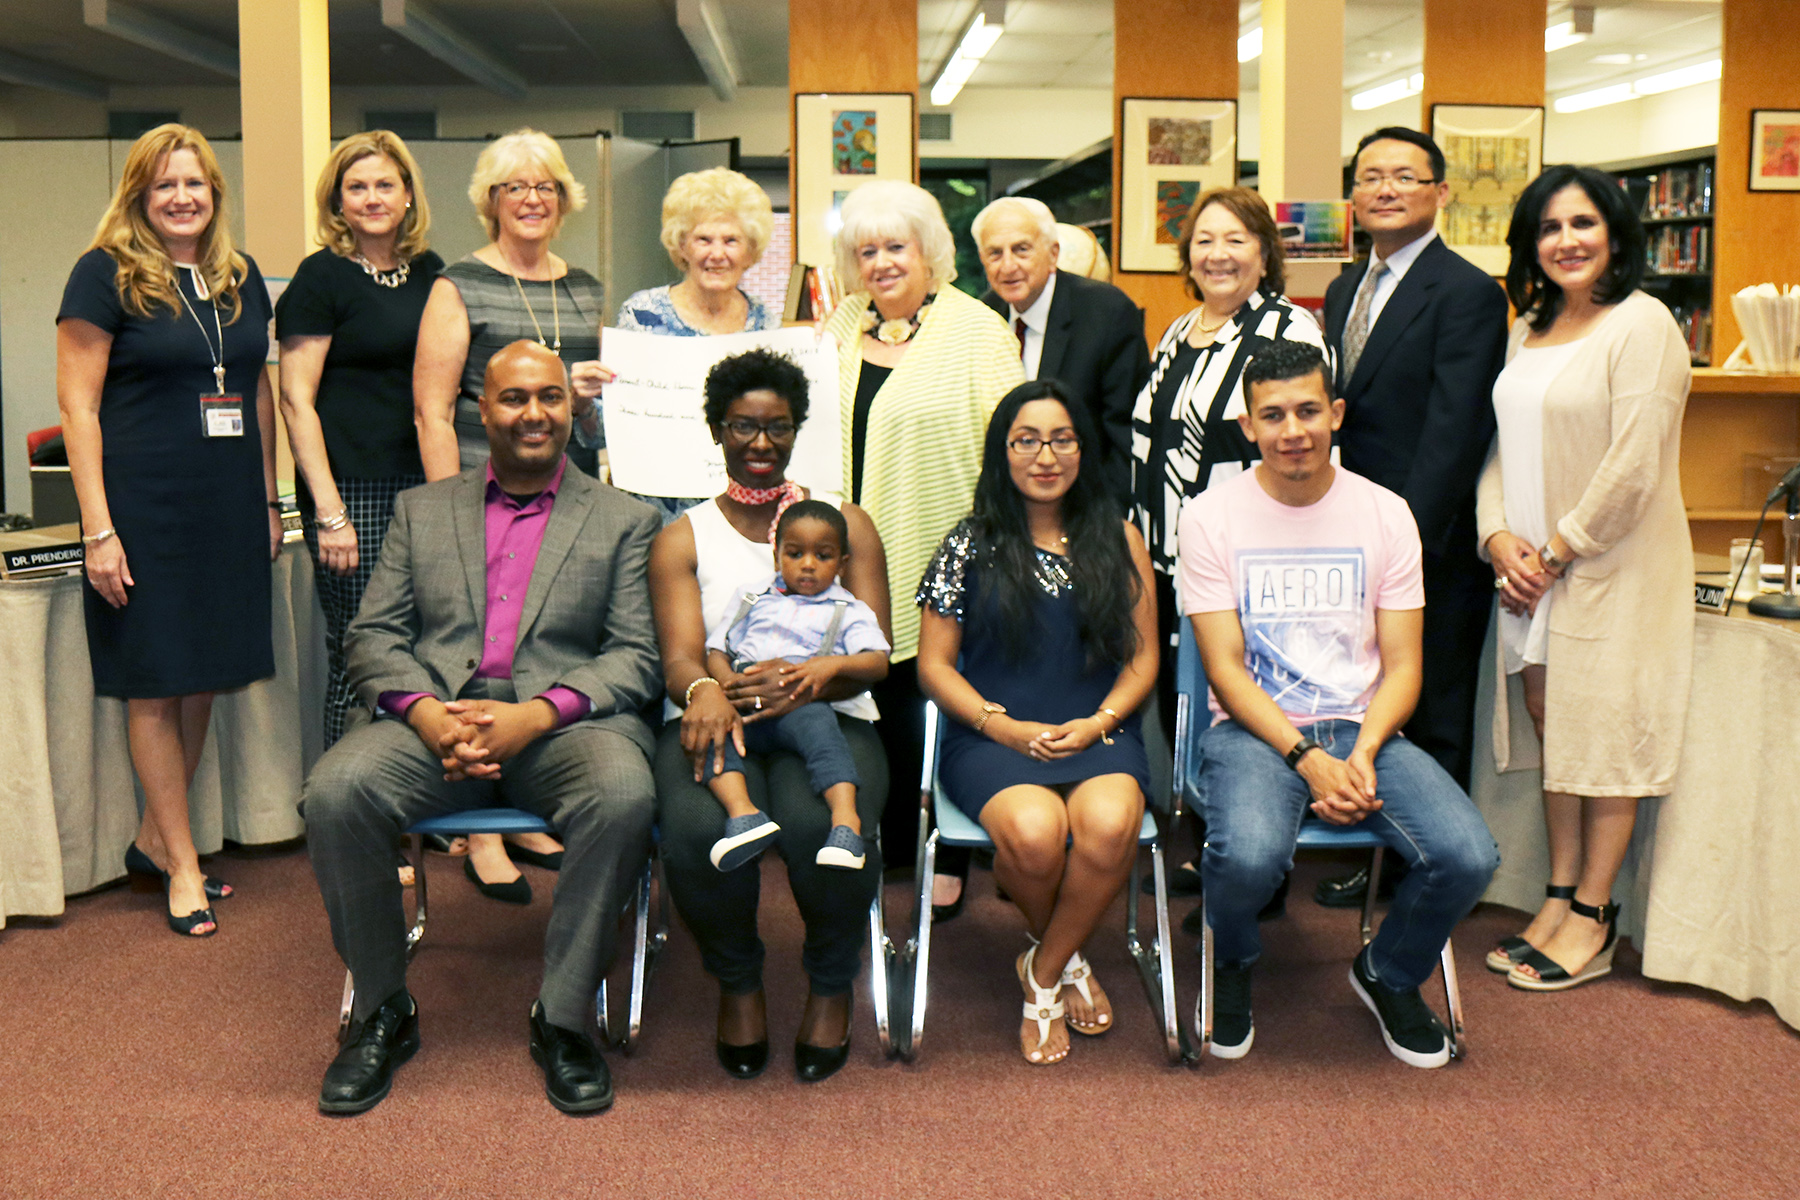 School administrators and board trustees joined PCHP lead teacher Suzanne Belmont, Program Coordinator Regina Farinaccio, and Miriam Chatinover of the NCJW, as well as families who benefitted from the program. (Photo courtesy of the Great Neck Public Schools)